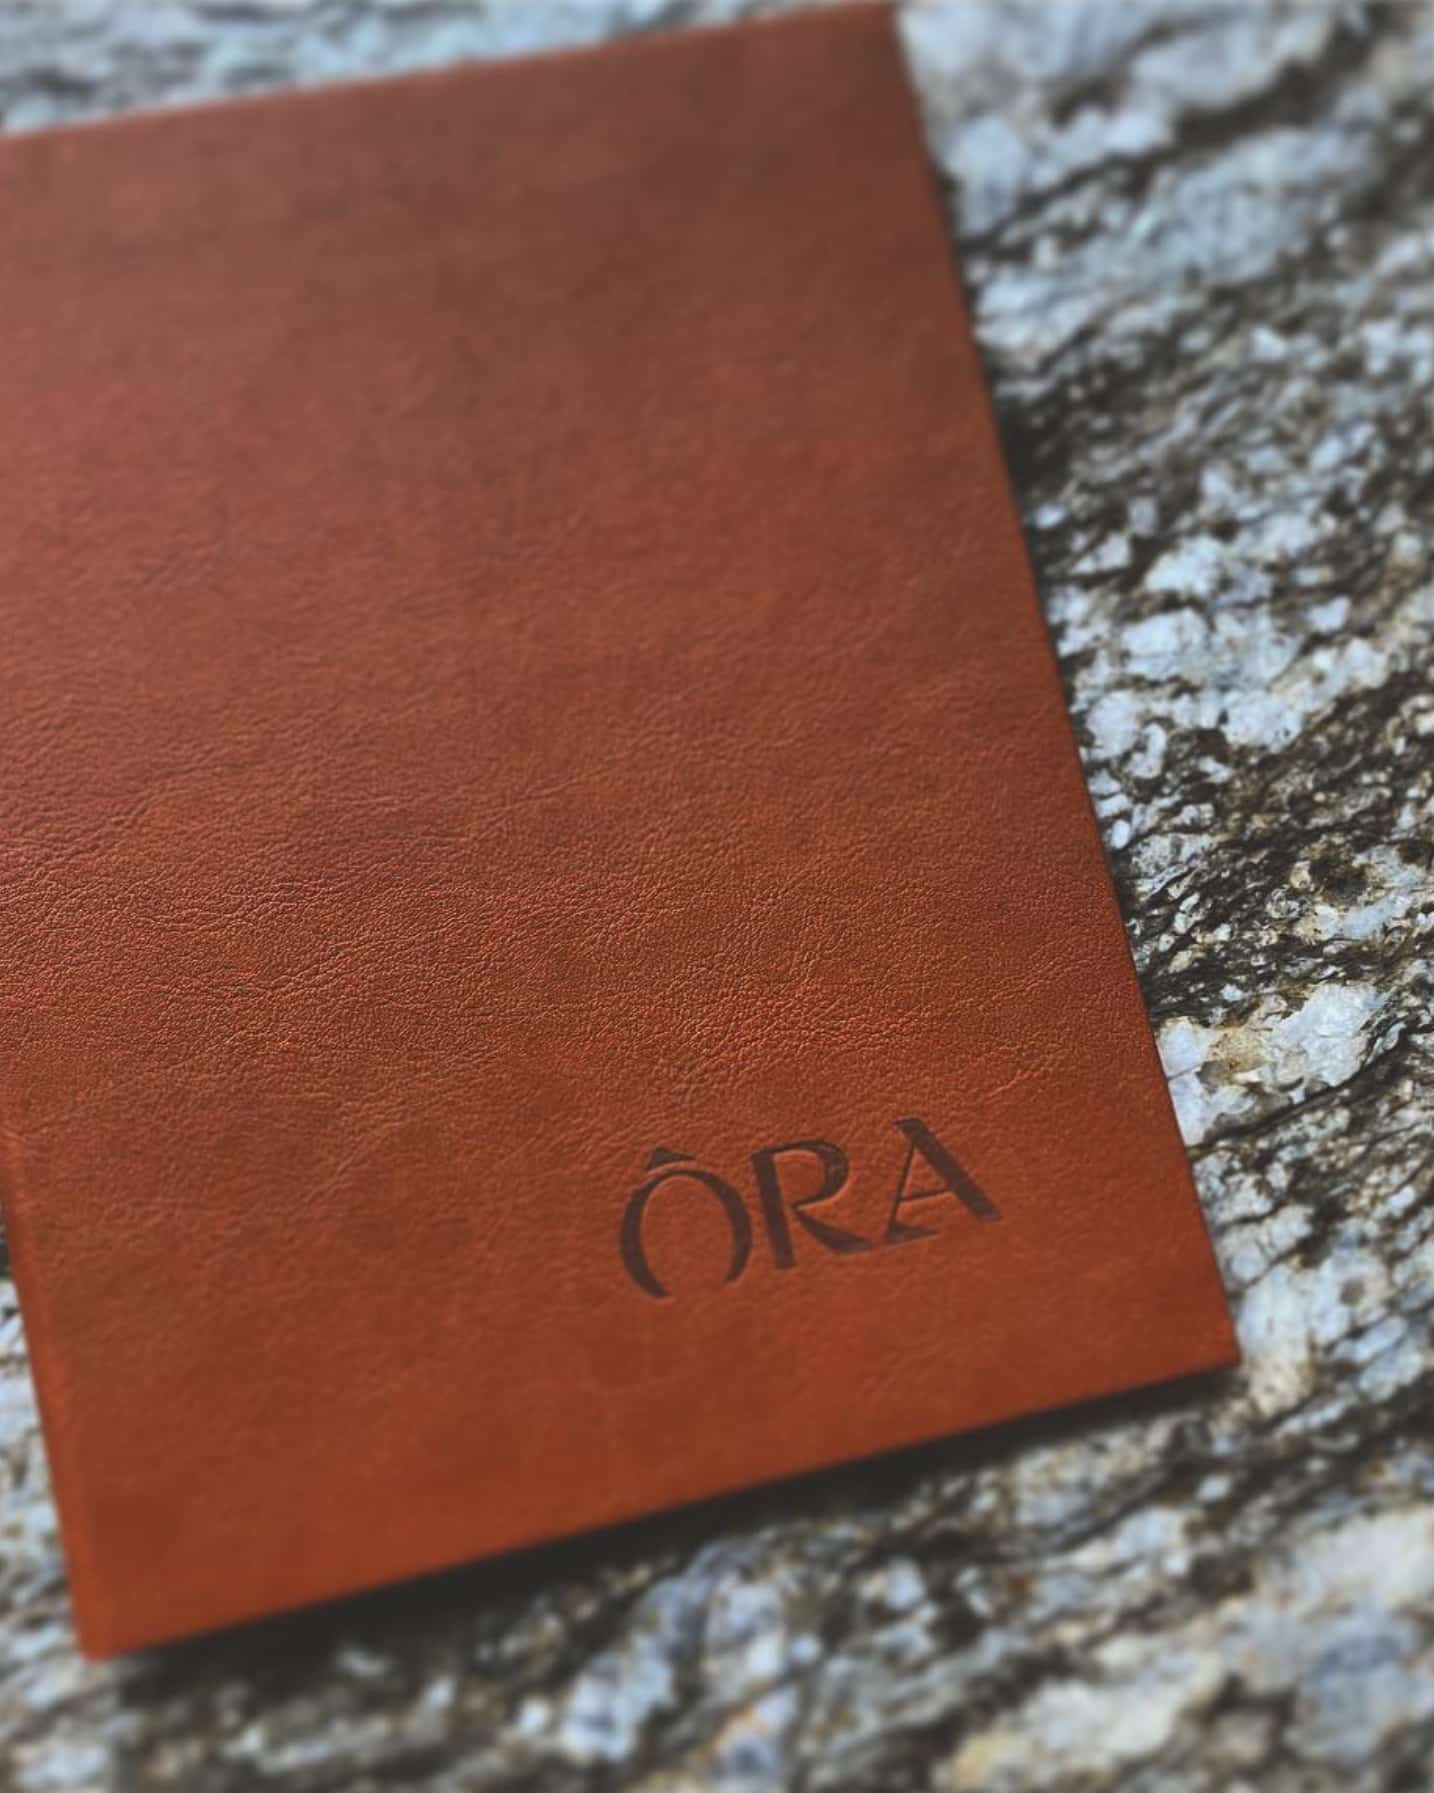 A brown leather menu cover, bearing the Ōra logo, sits on a mottled granite surface.